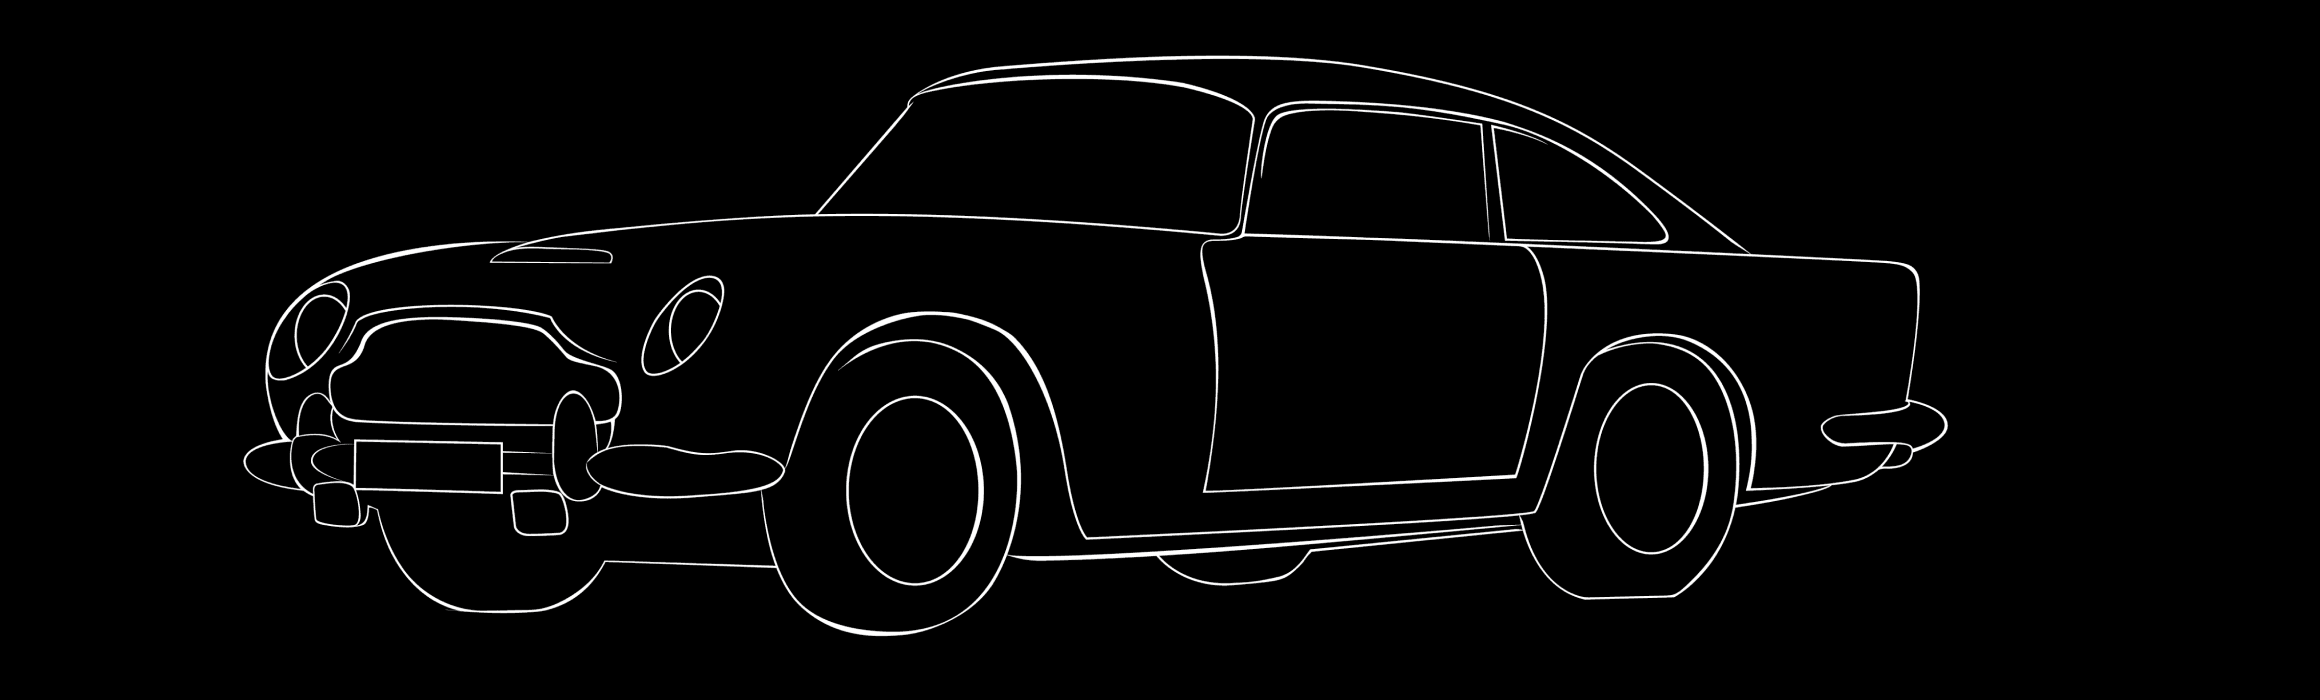 A black image with an illustration of a classic car facing left, drawn in white lines